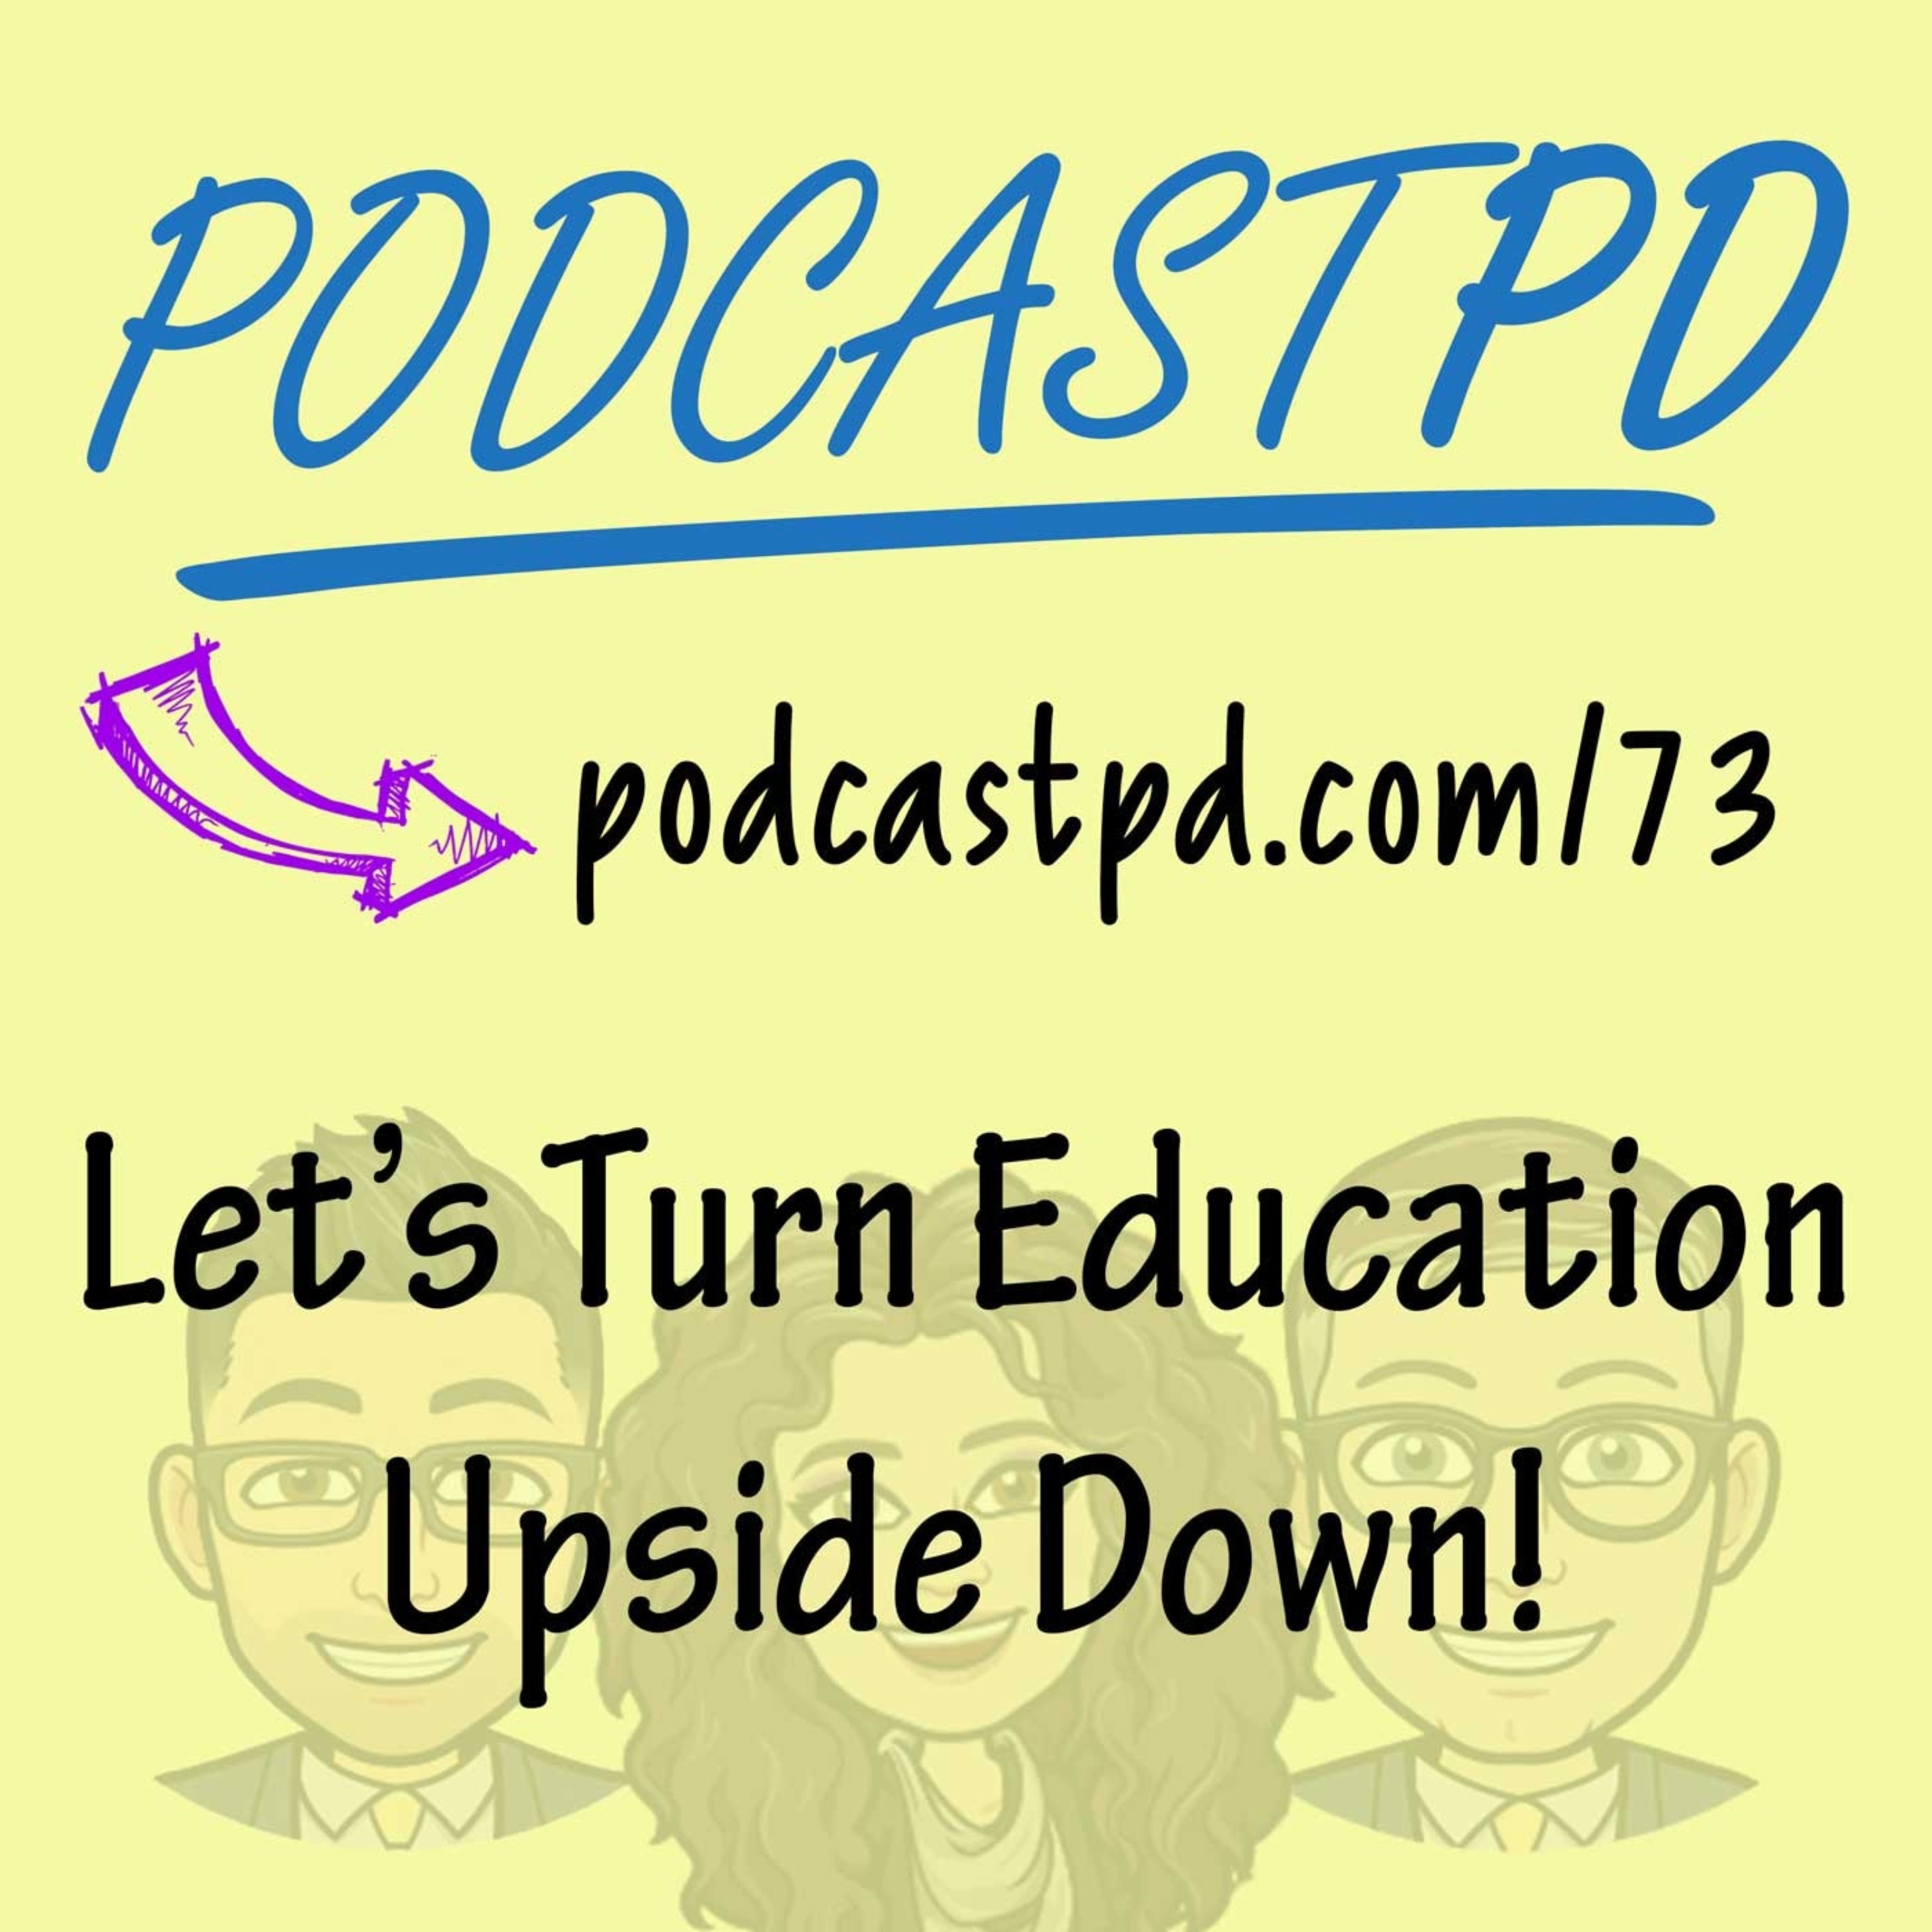 Let's Turn Education Upside Down! - PPD073 Image